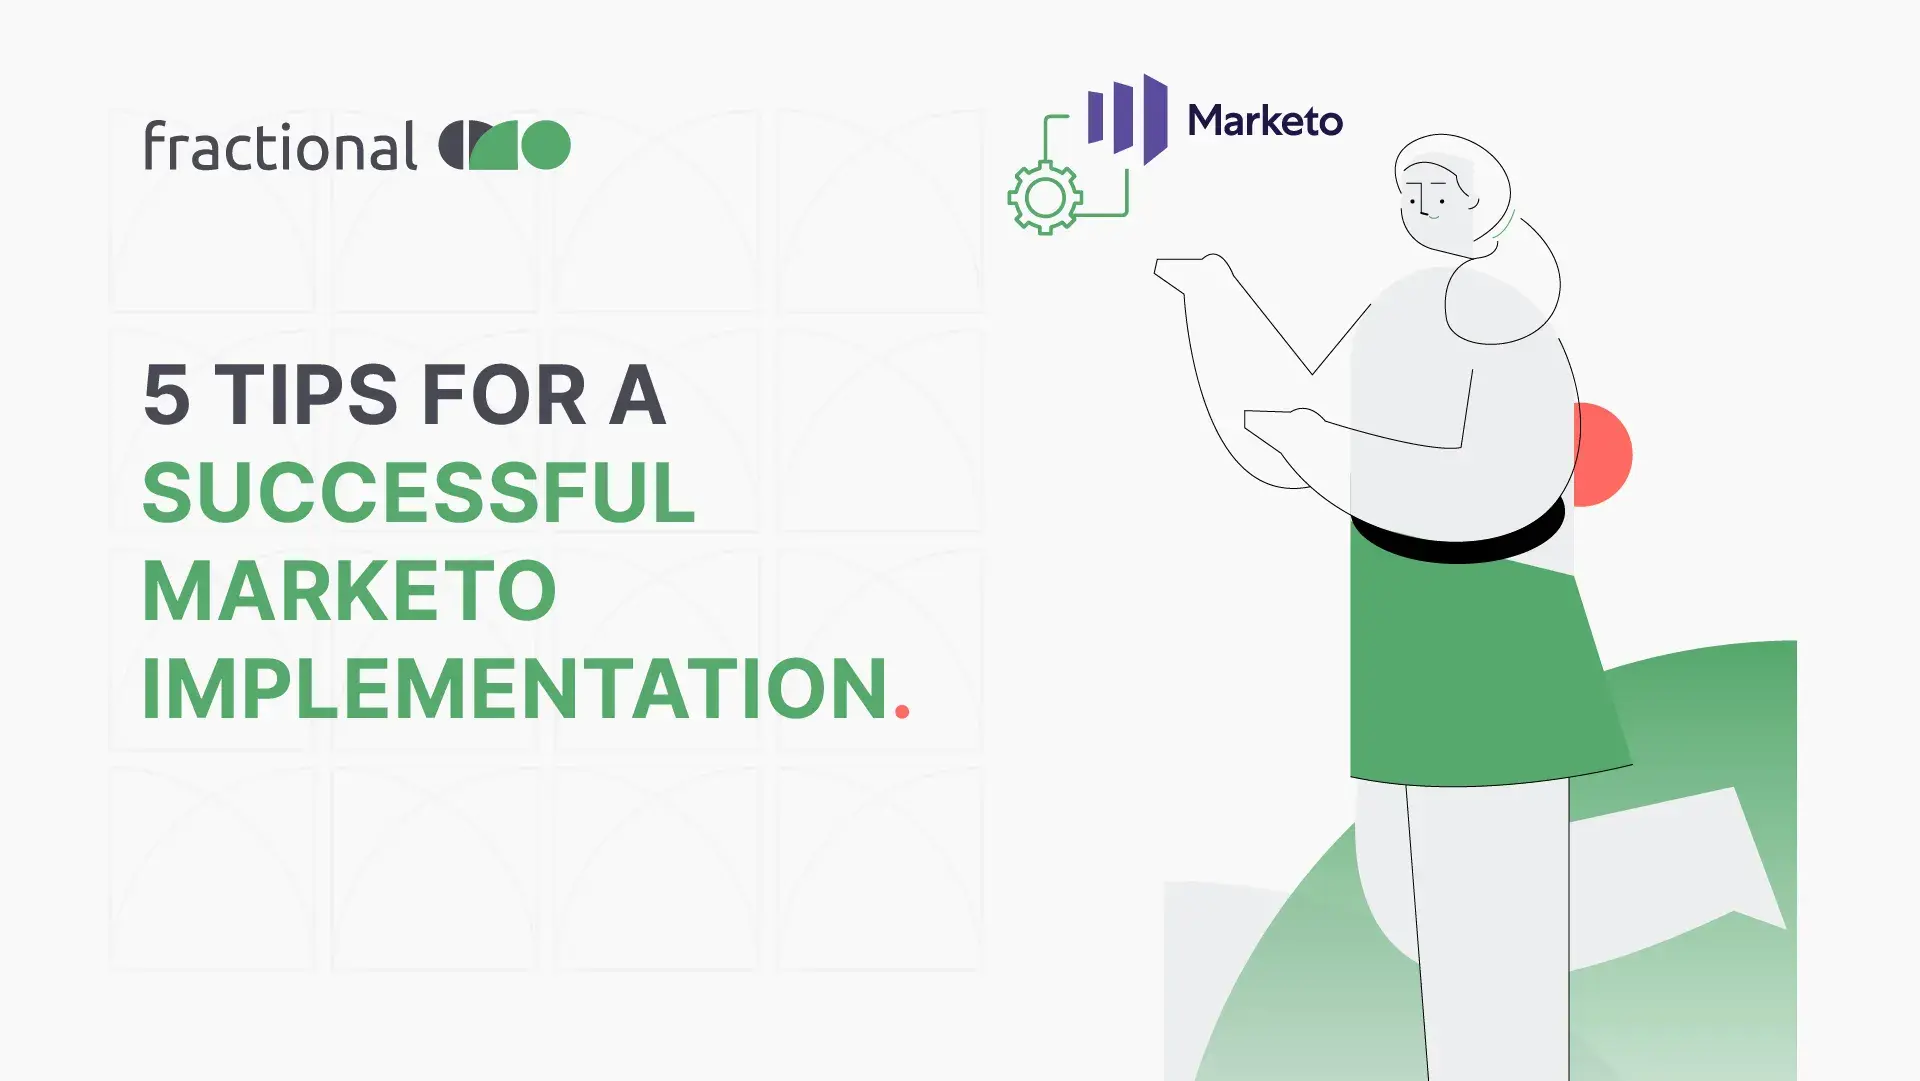 5 tips for a successful Marketo implementation